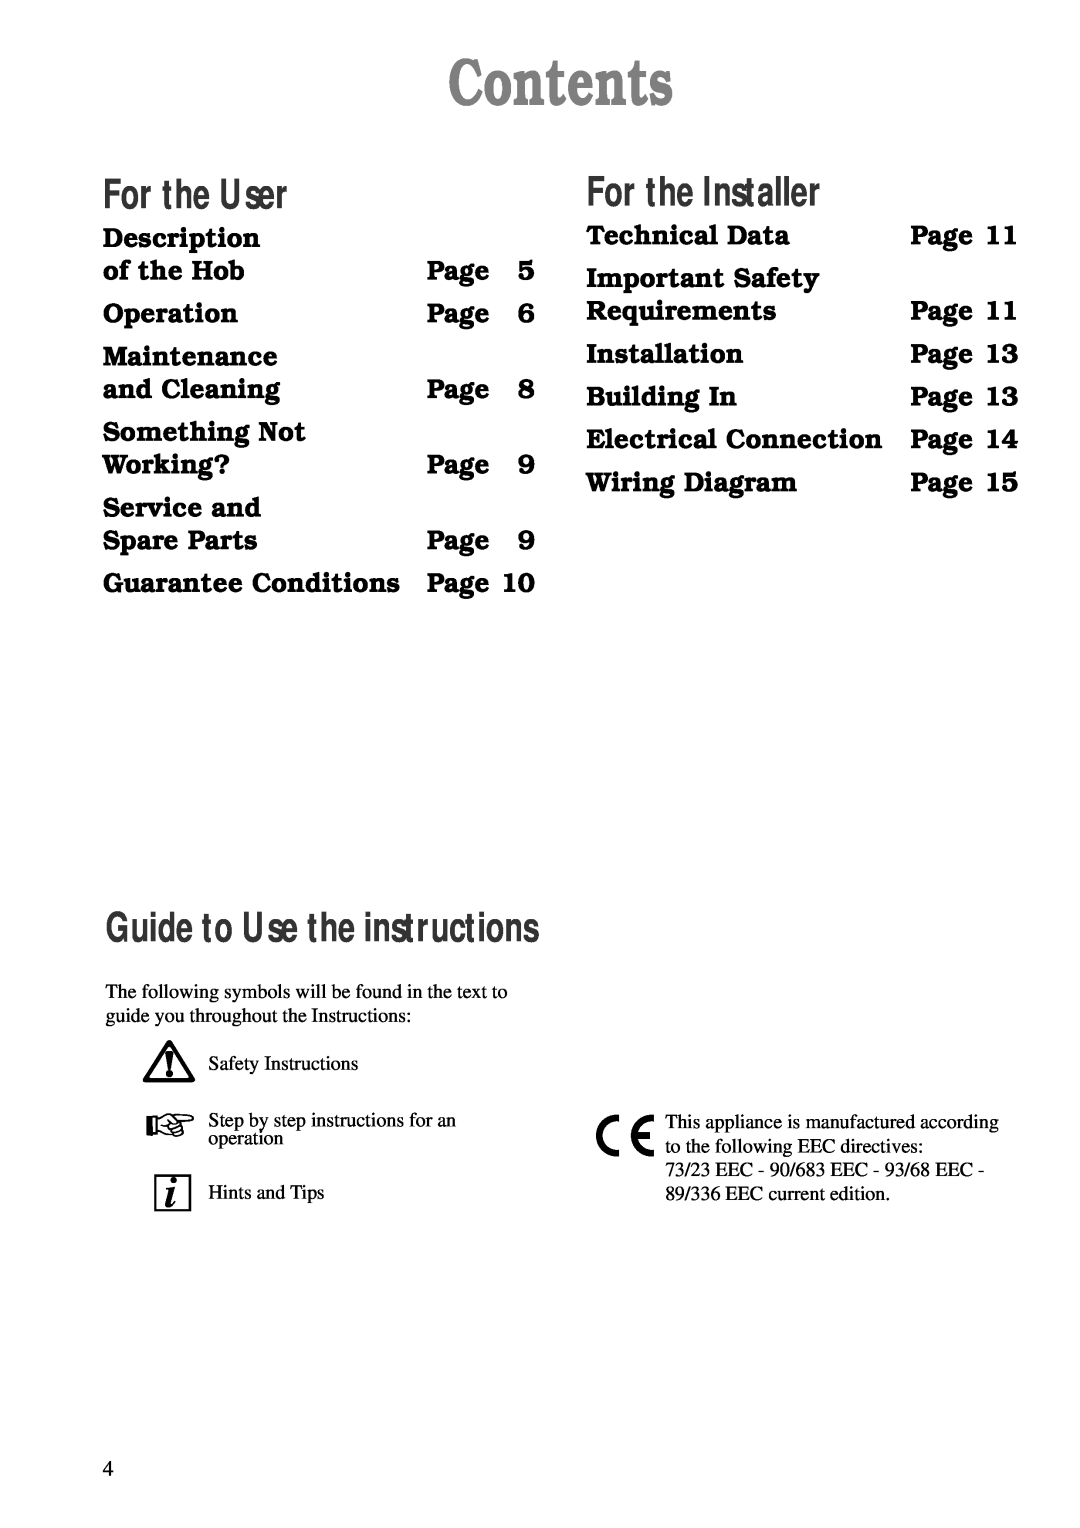 Zanussi ZBE 602 manual Contents, For the User, For the Installer, Guide to Use the instructions 